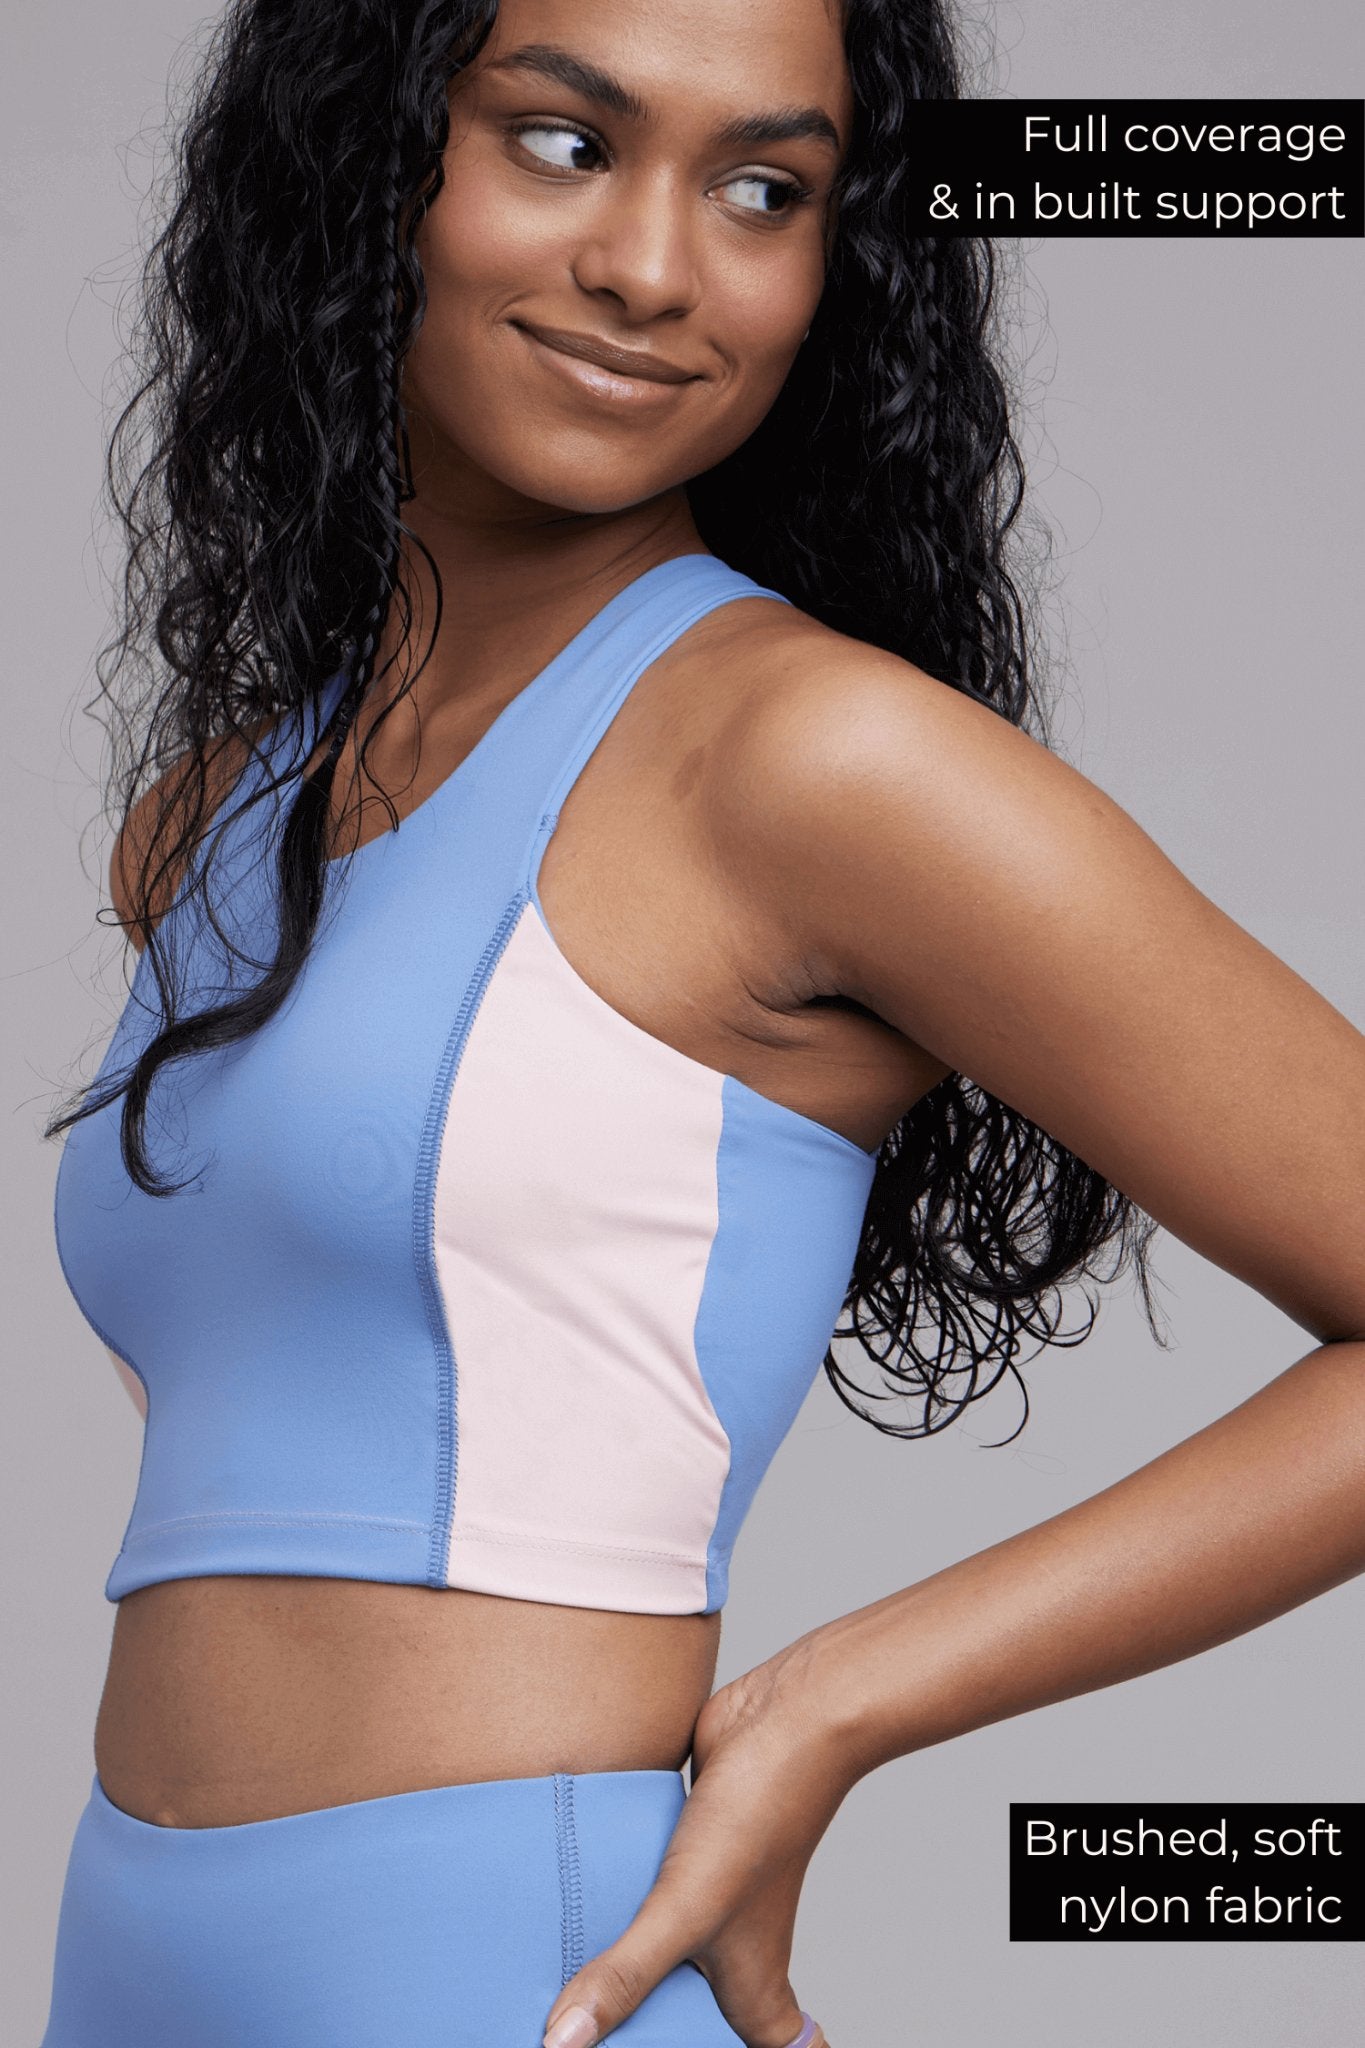 Buy Comfortable Blue Long Sports Bra Top with pads/cups - Life & Jam